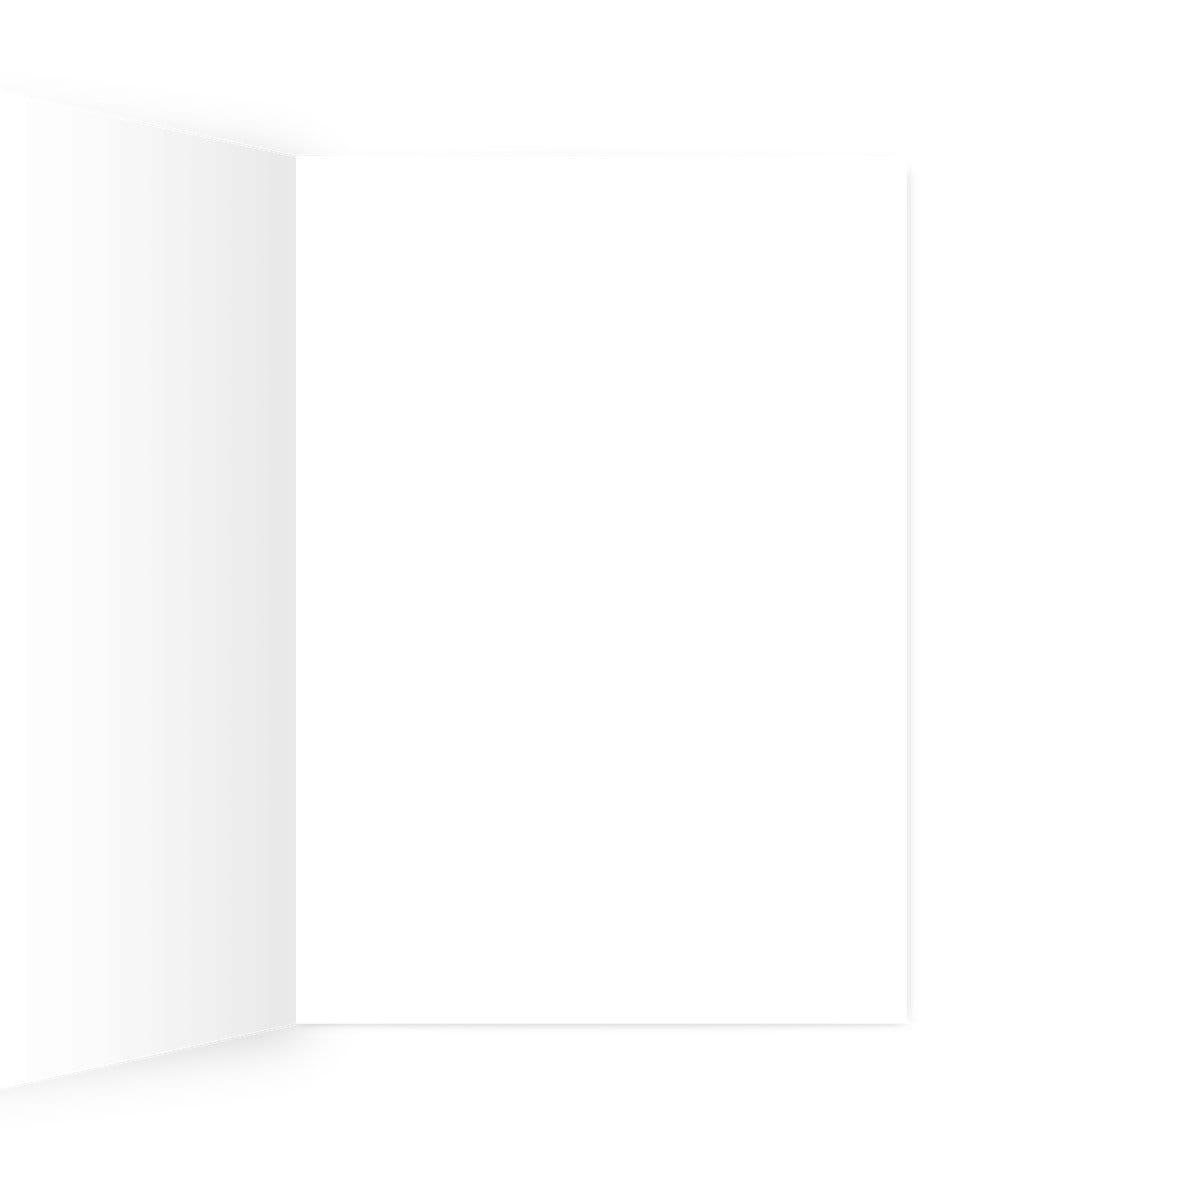 A Twisted Gifts Akira Greeting Card on a white background.